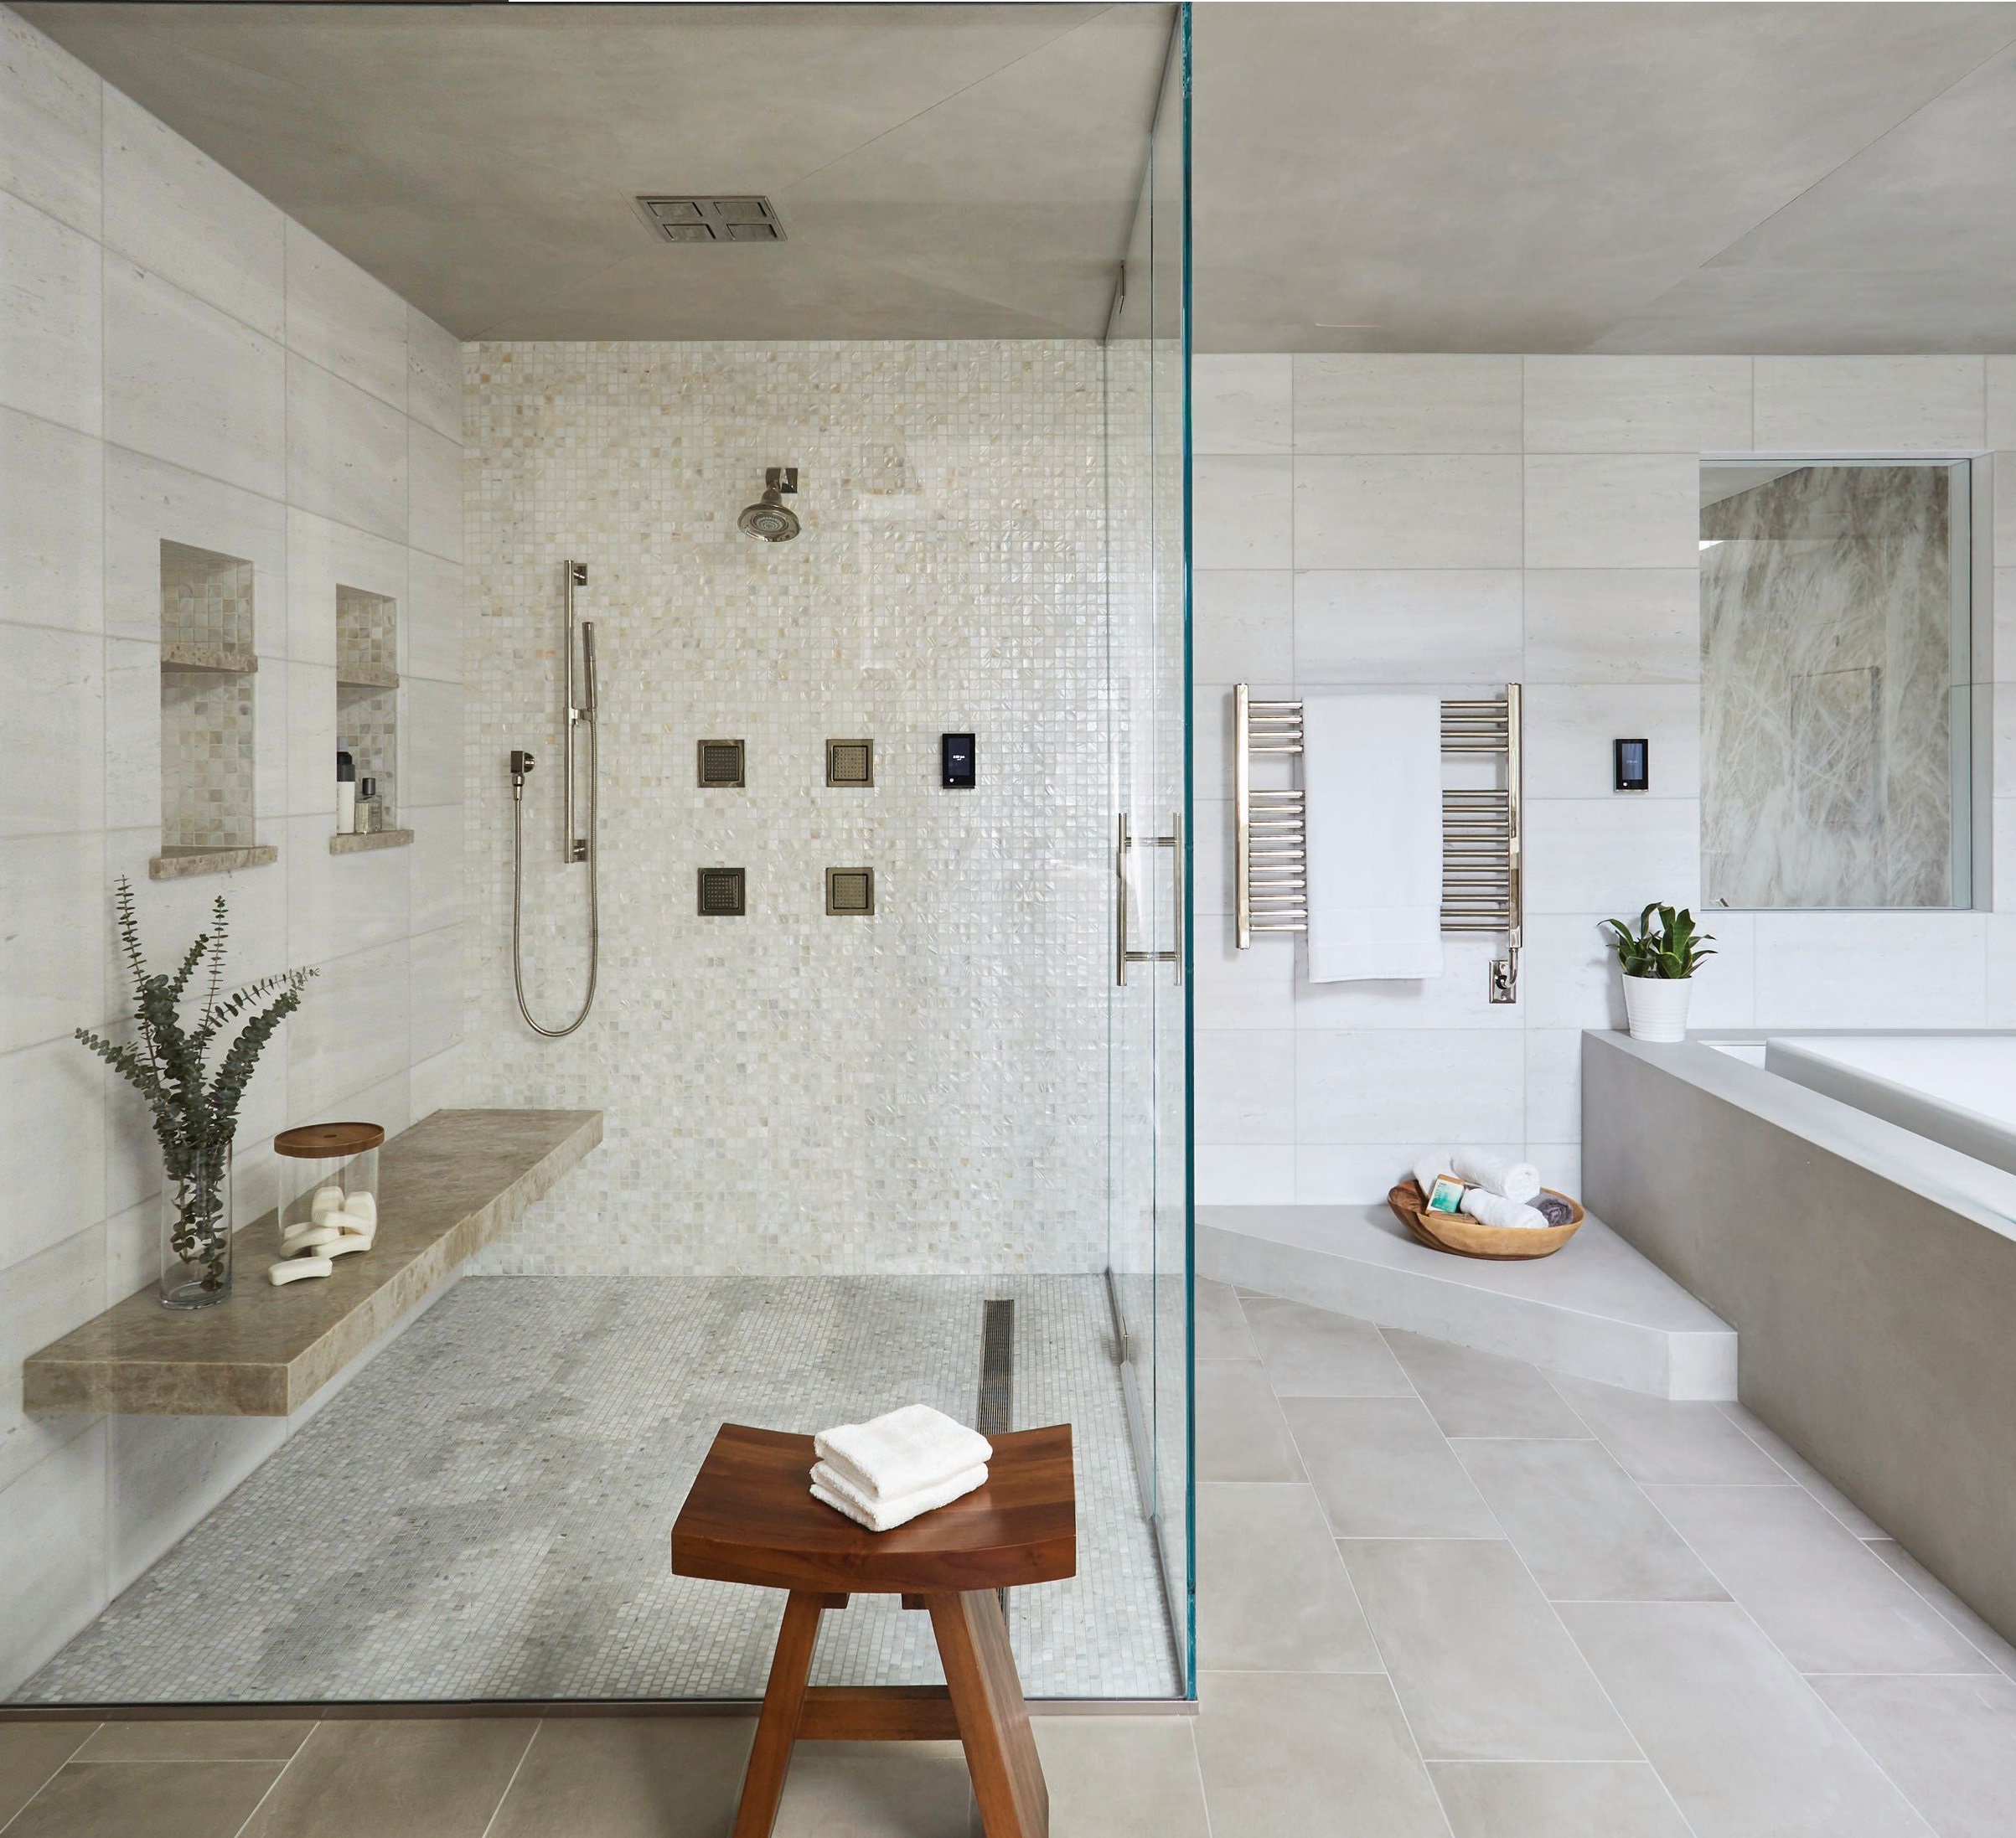 The capacious primary bath features a chic Kohler tub with waterfall edge. Photographed by MICHAEL ALAN KASKEL